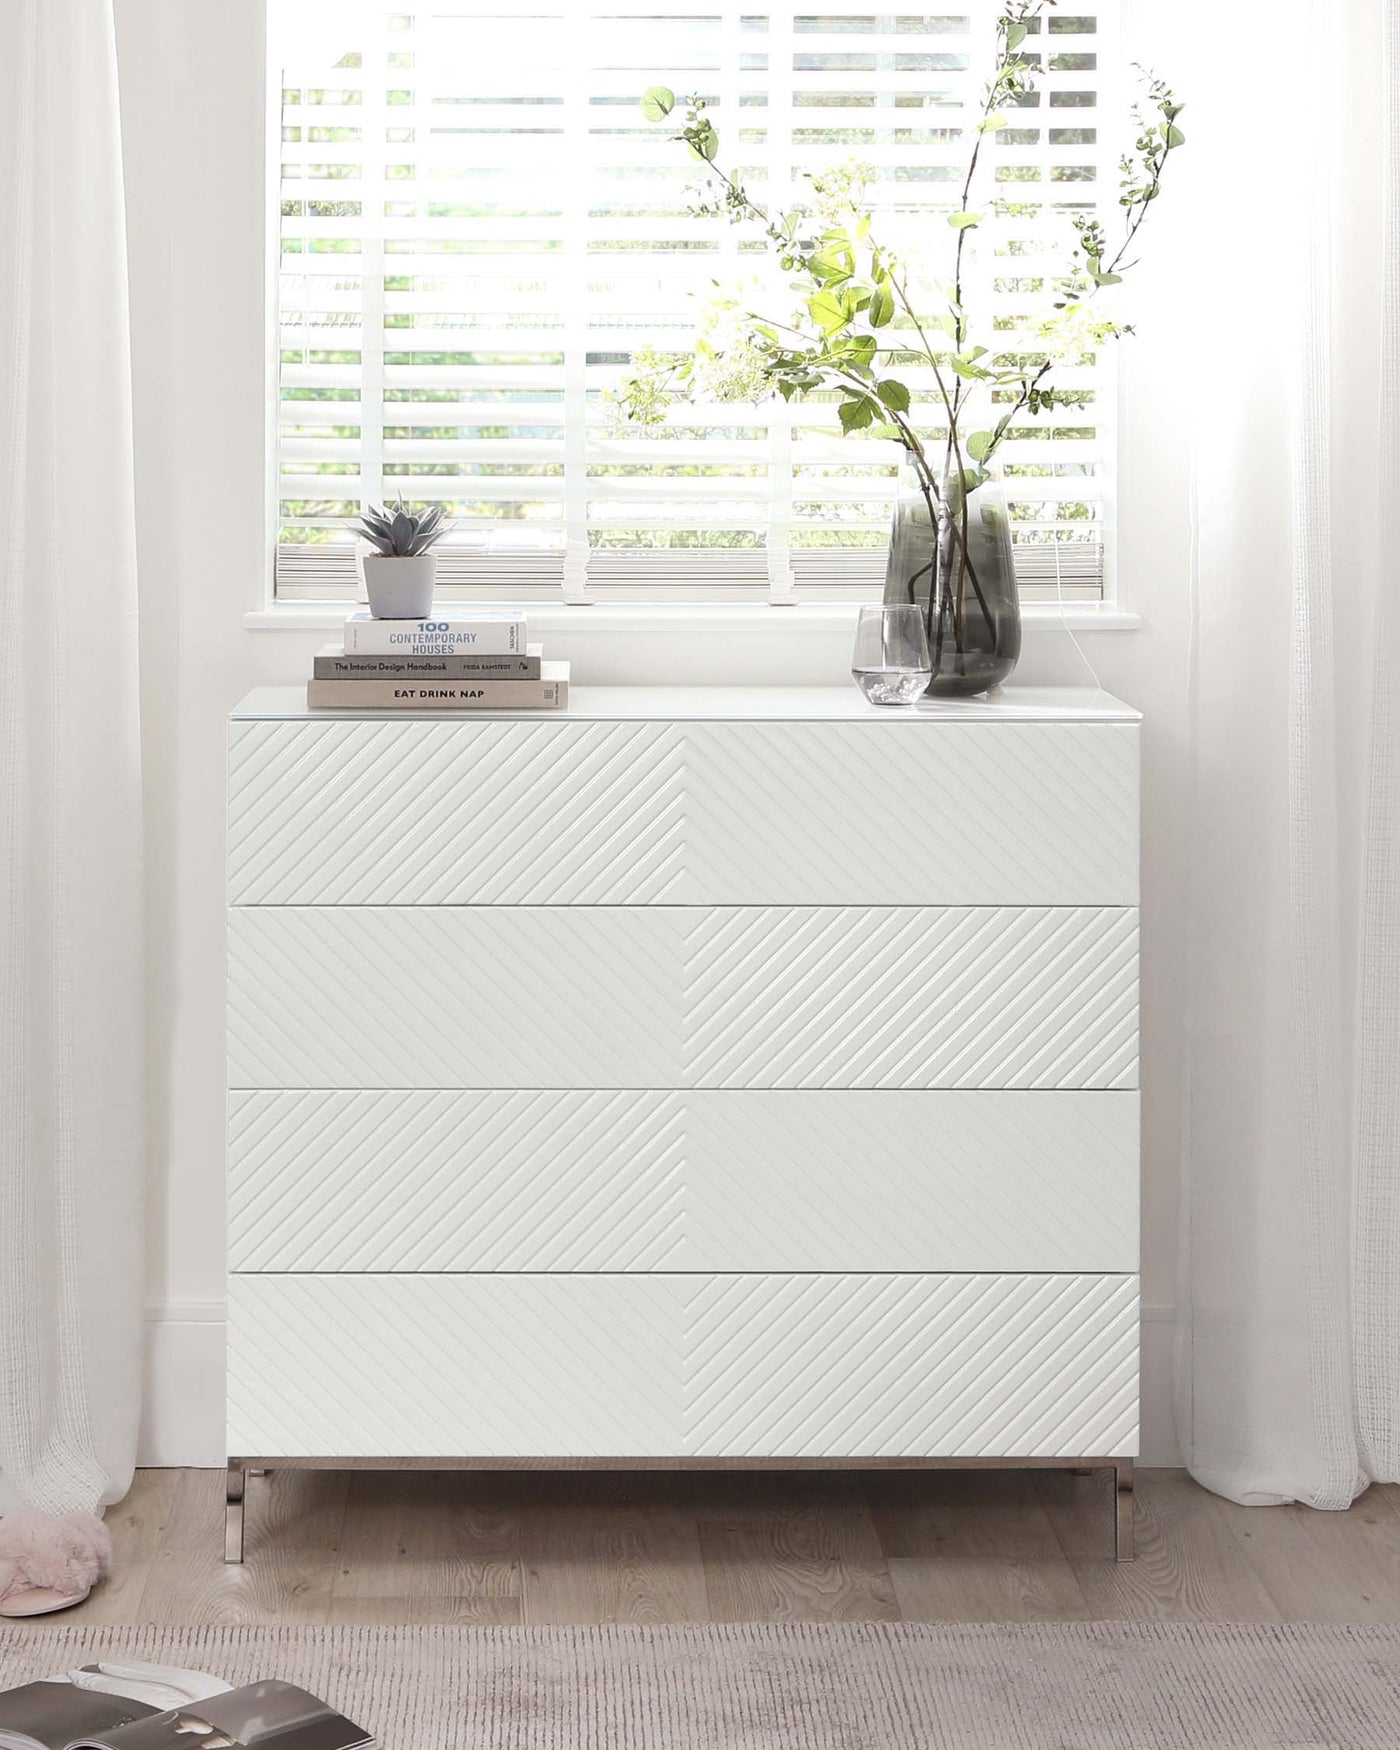 Modern white dresser with a textured chevron pattern on the drawer fronts and sleek metallic legs, accessorized with books, decorative plants, and a vase.